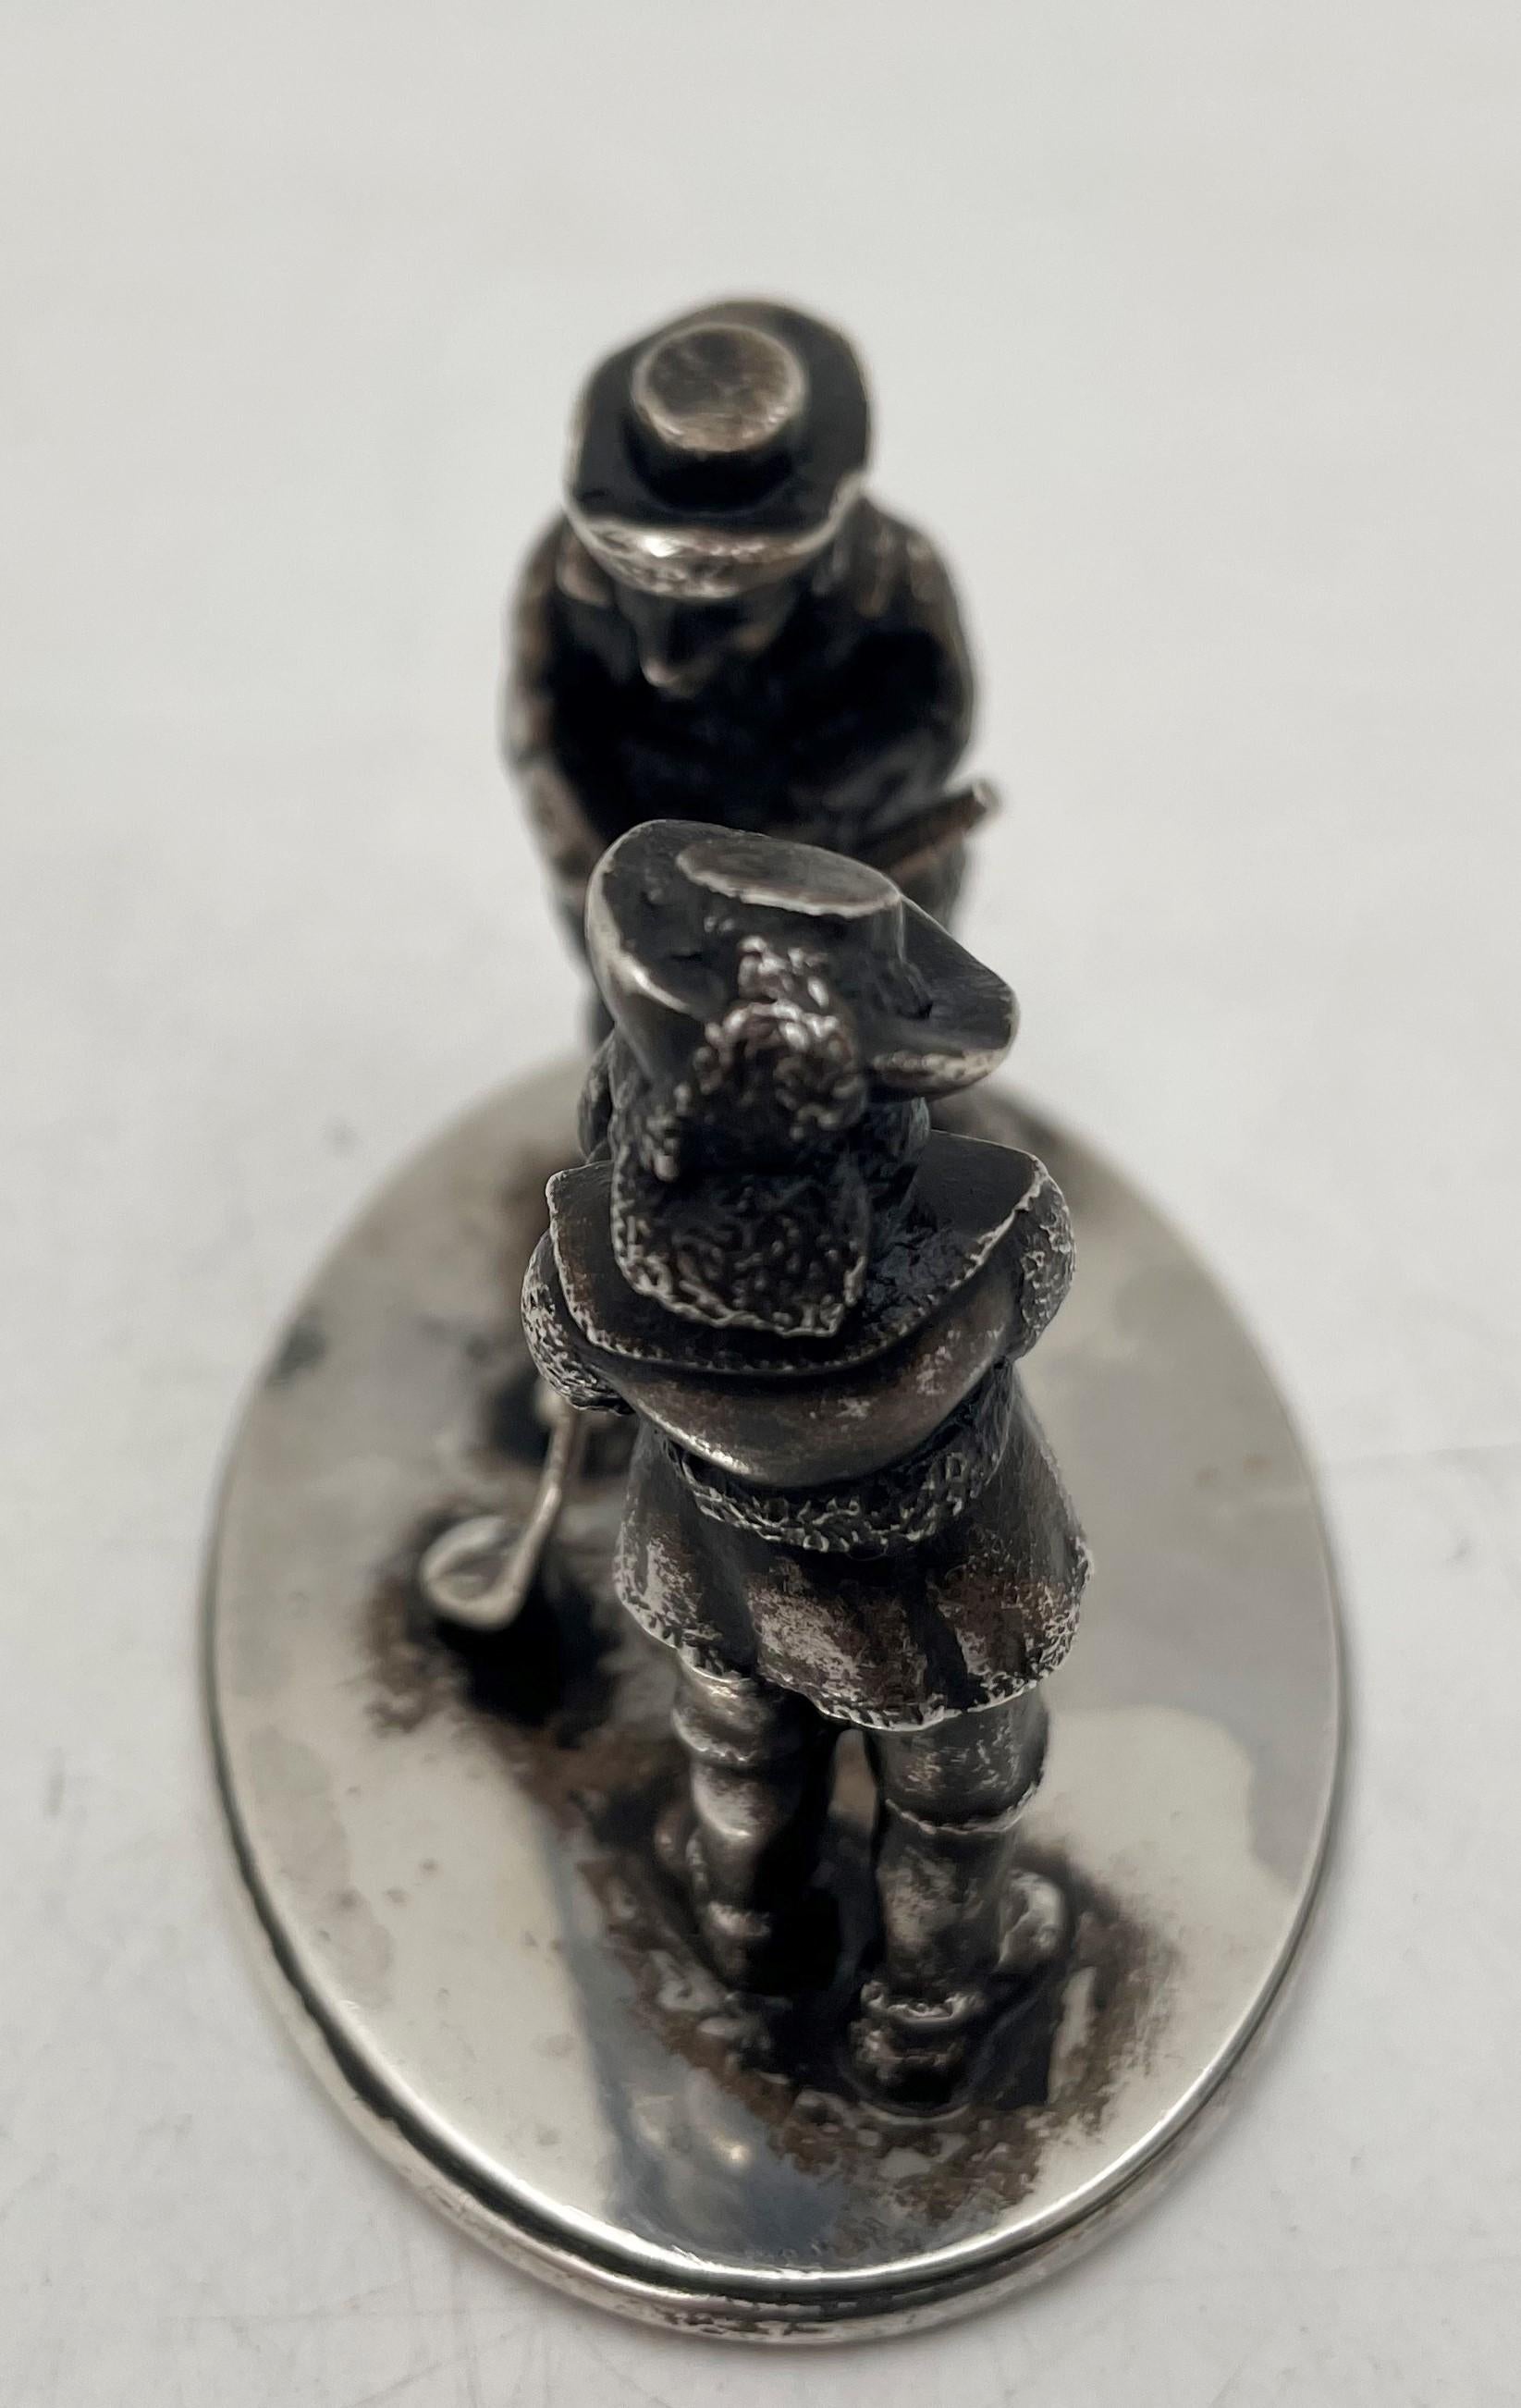 Howard & Co., sterling silver, late 19th or early 20th century, highly detailed and realistic miniature of 2 golfers on a stand. It measures 2 1/4'' in height by 3 1/8'' in width by 2'' in depth, and bears hallmarks as shown. 

Howard & Company was